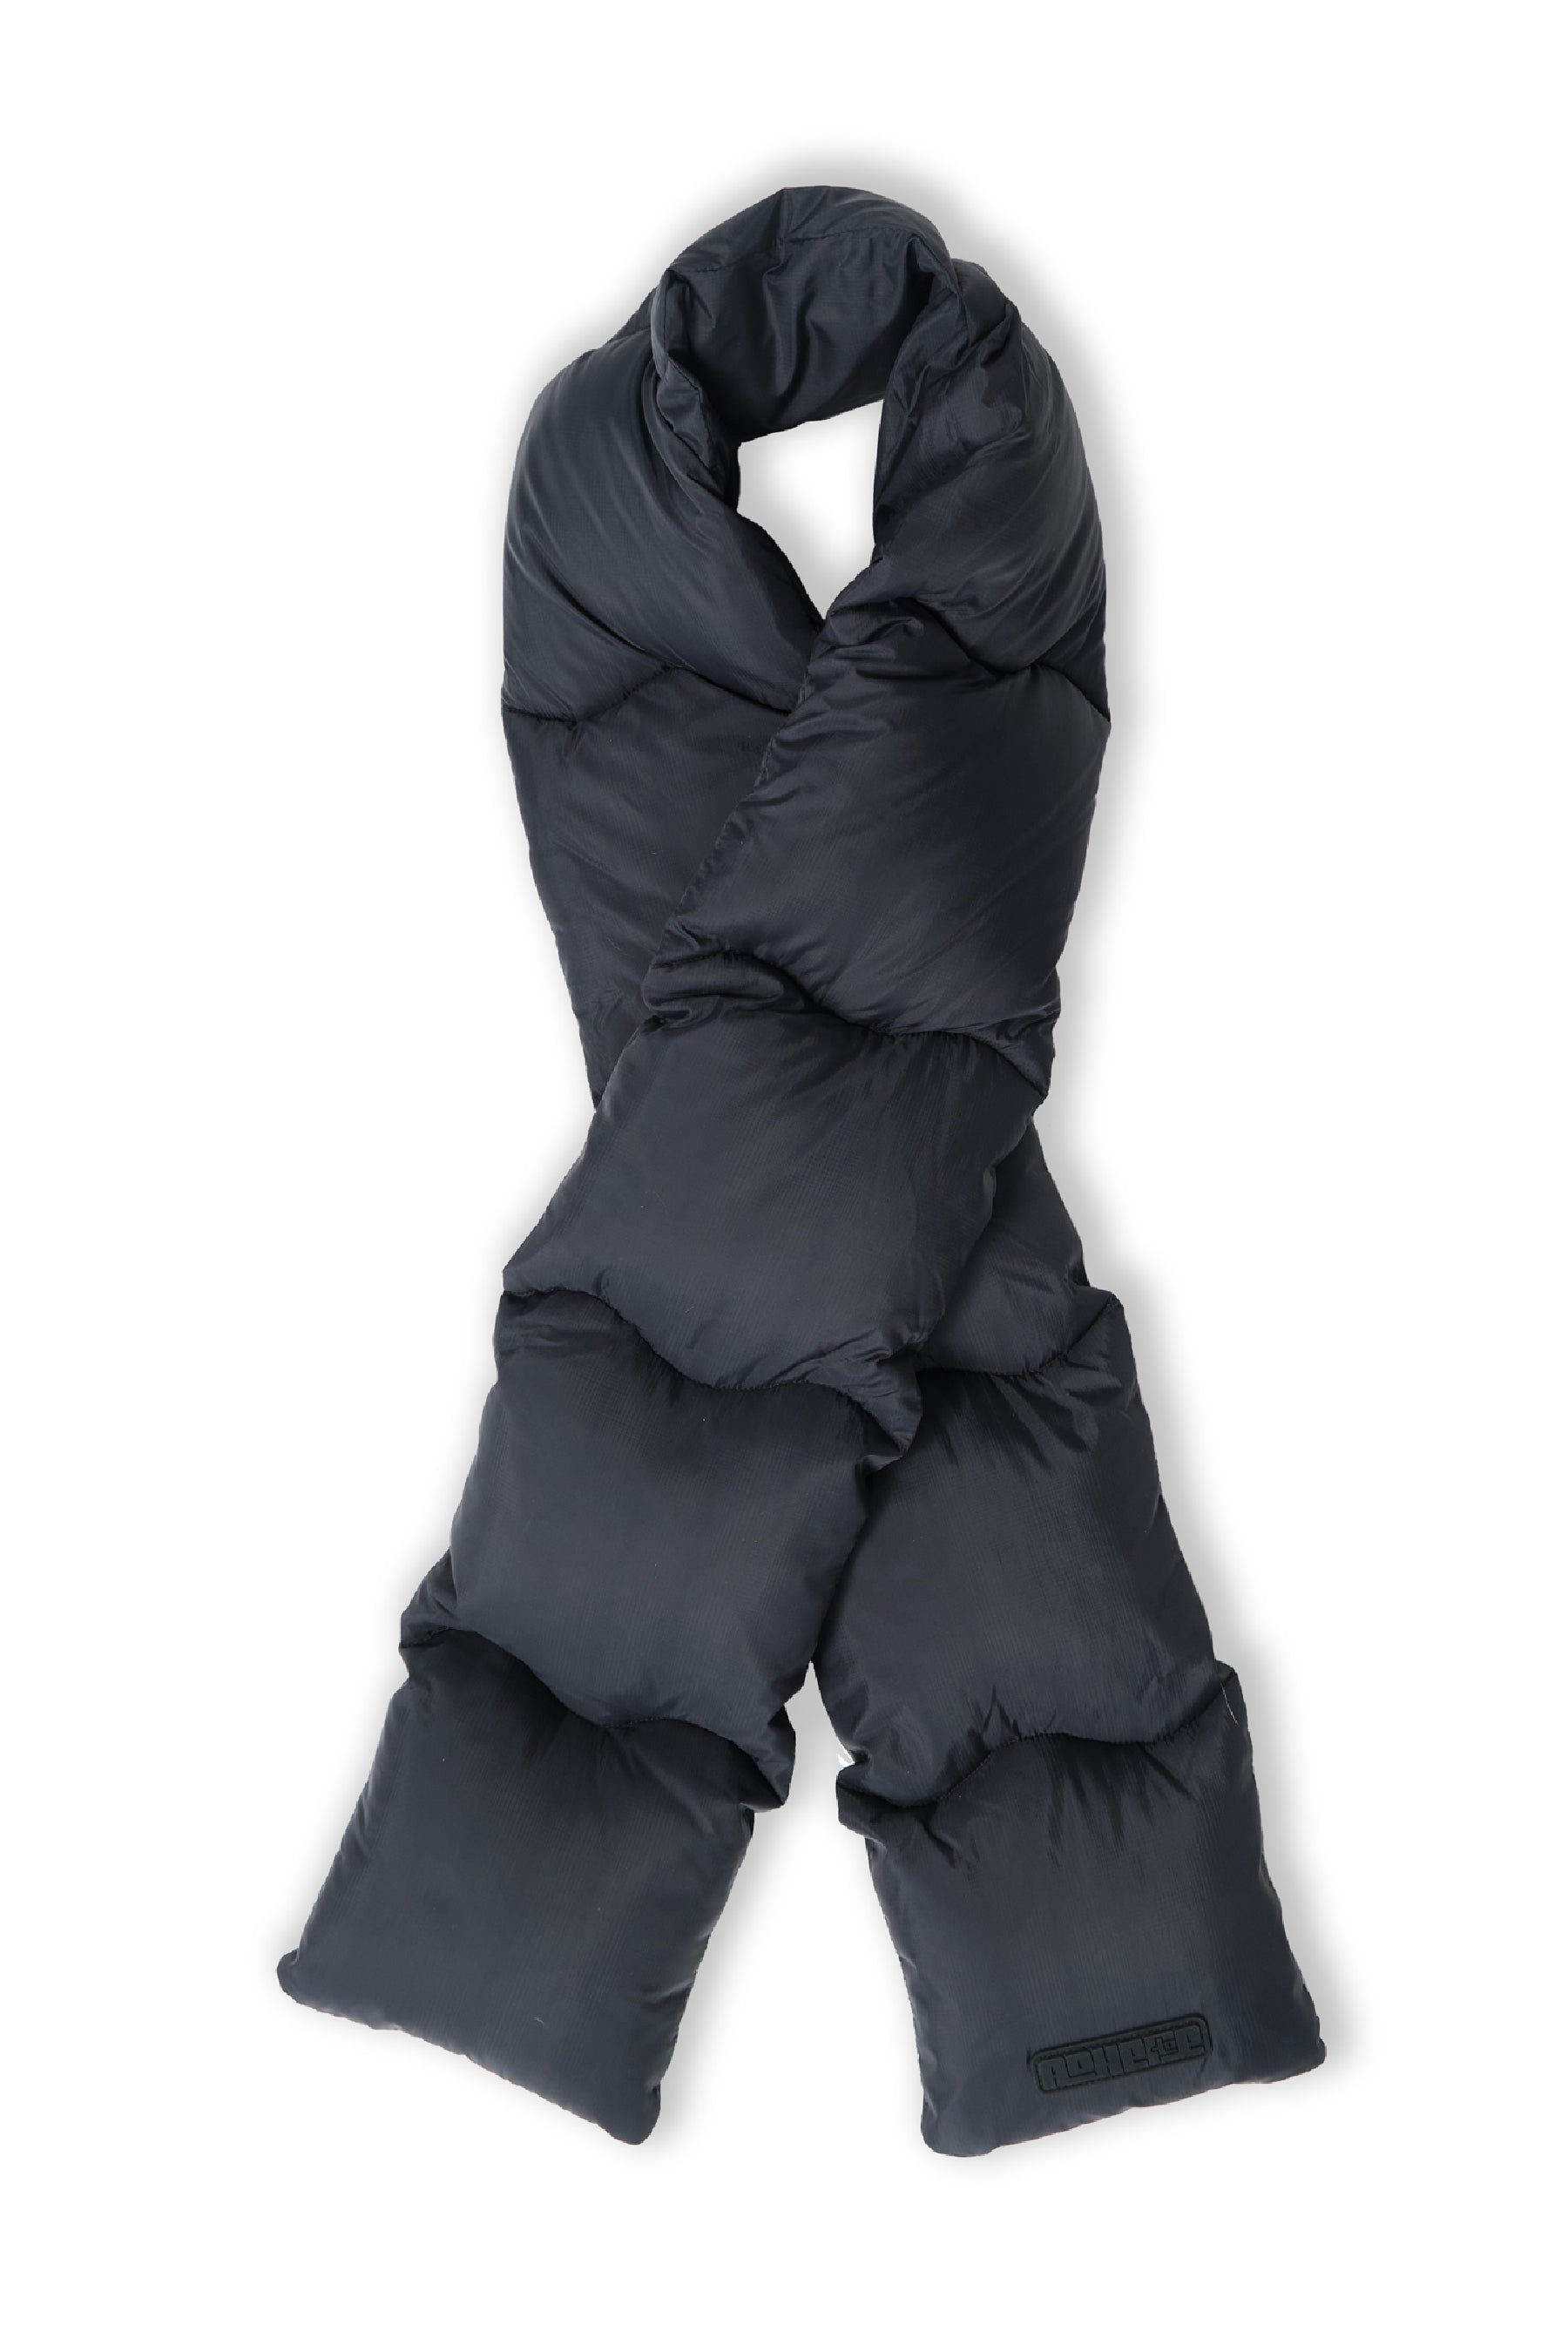  Re:Down® Black Puffer Scarf - Adhere To  - 6